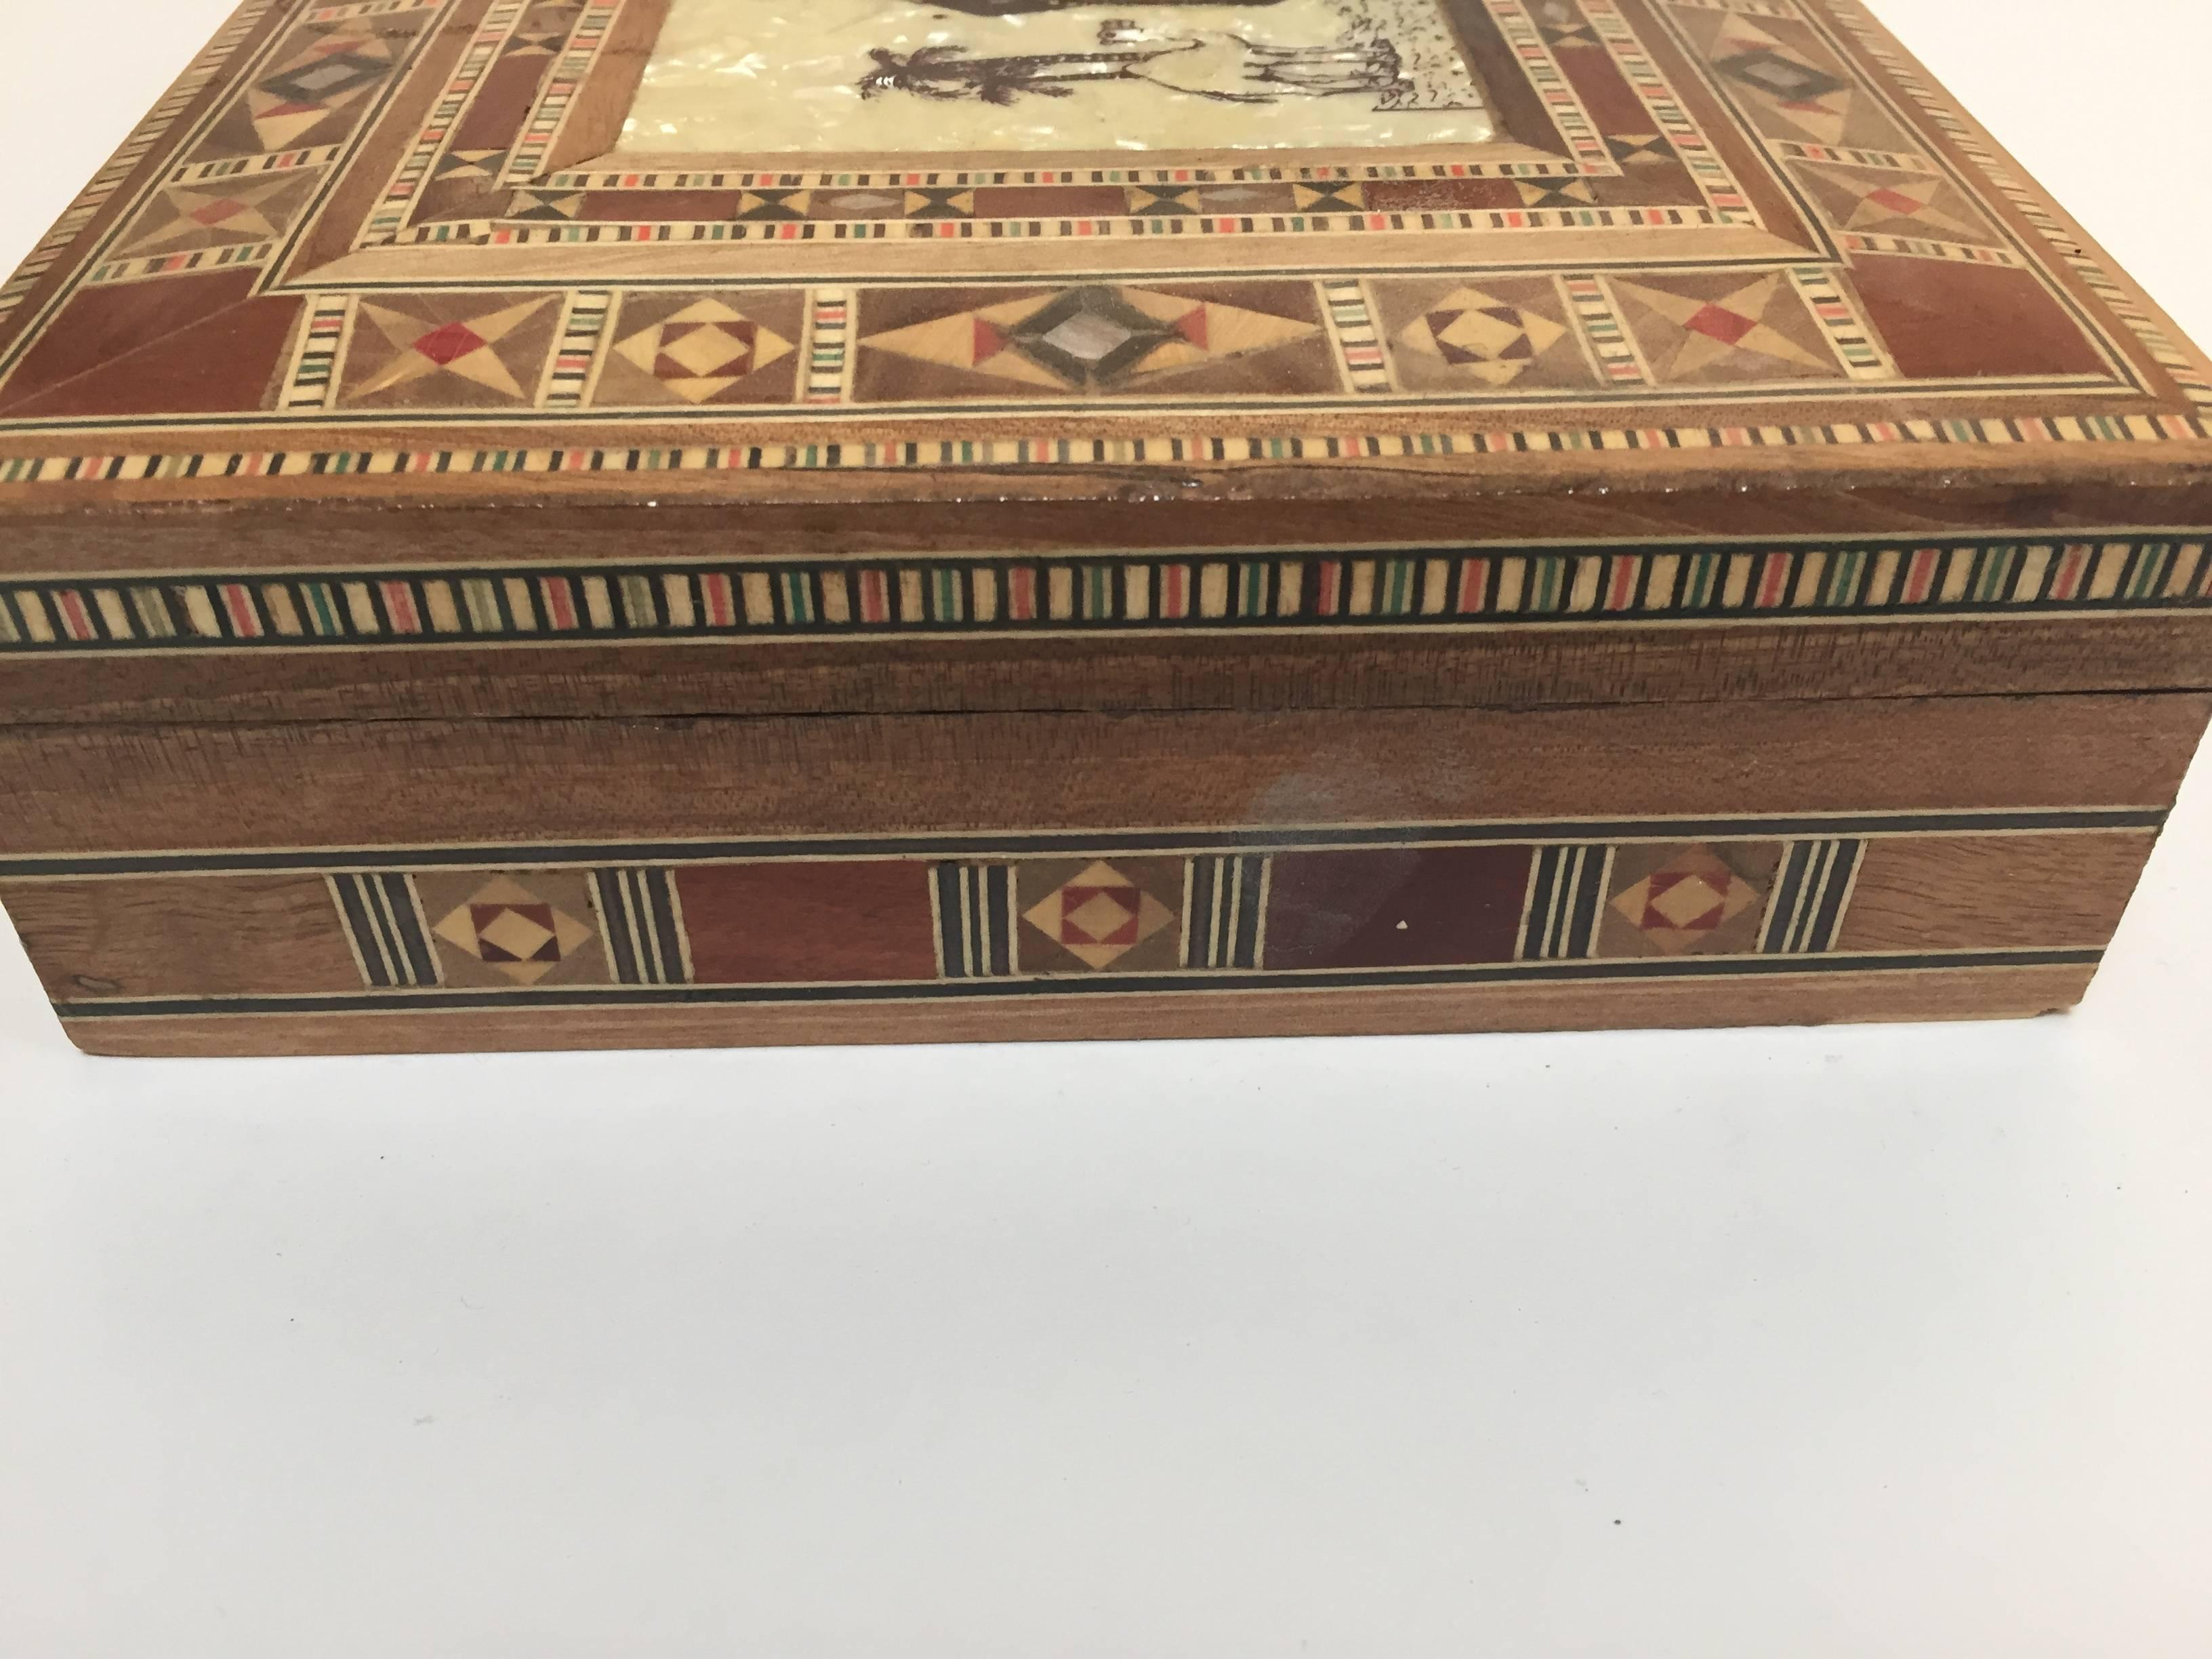 20th Century Middle Eastern Syrian Decorative Box